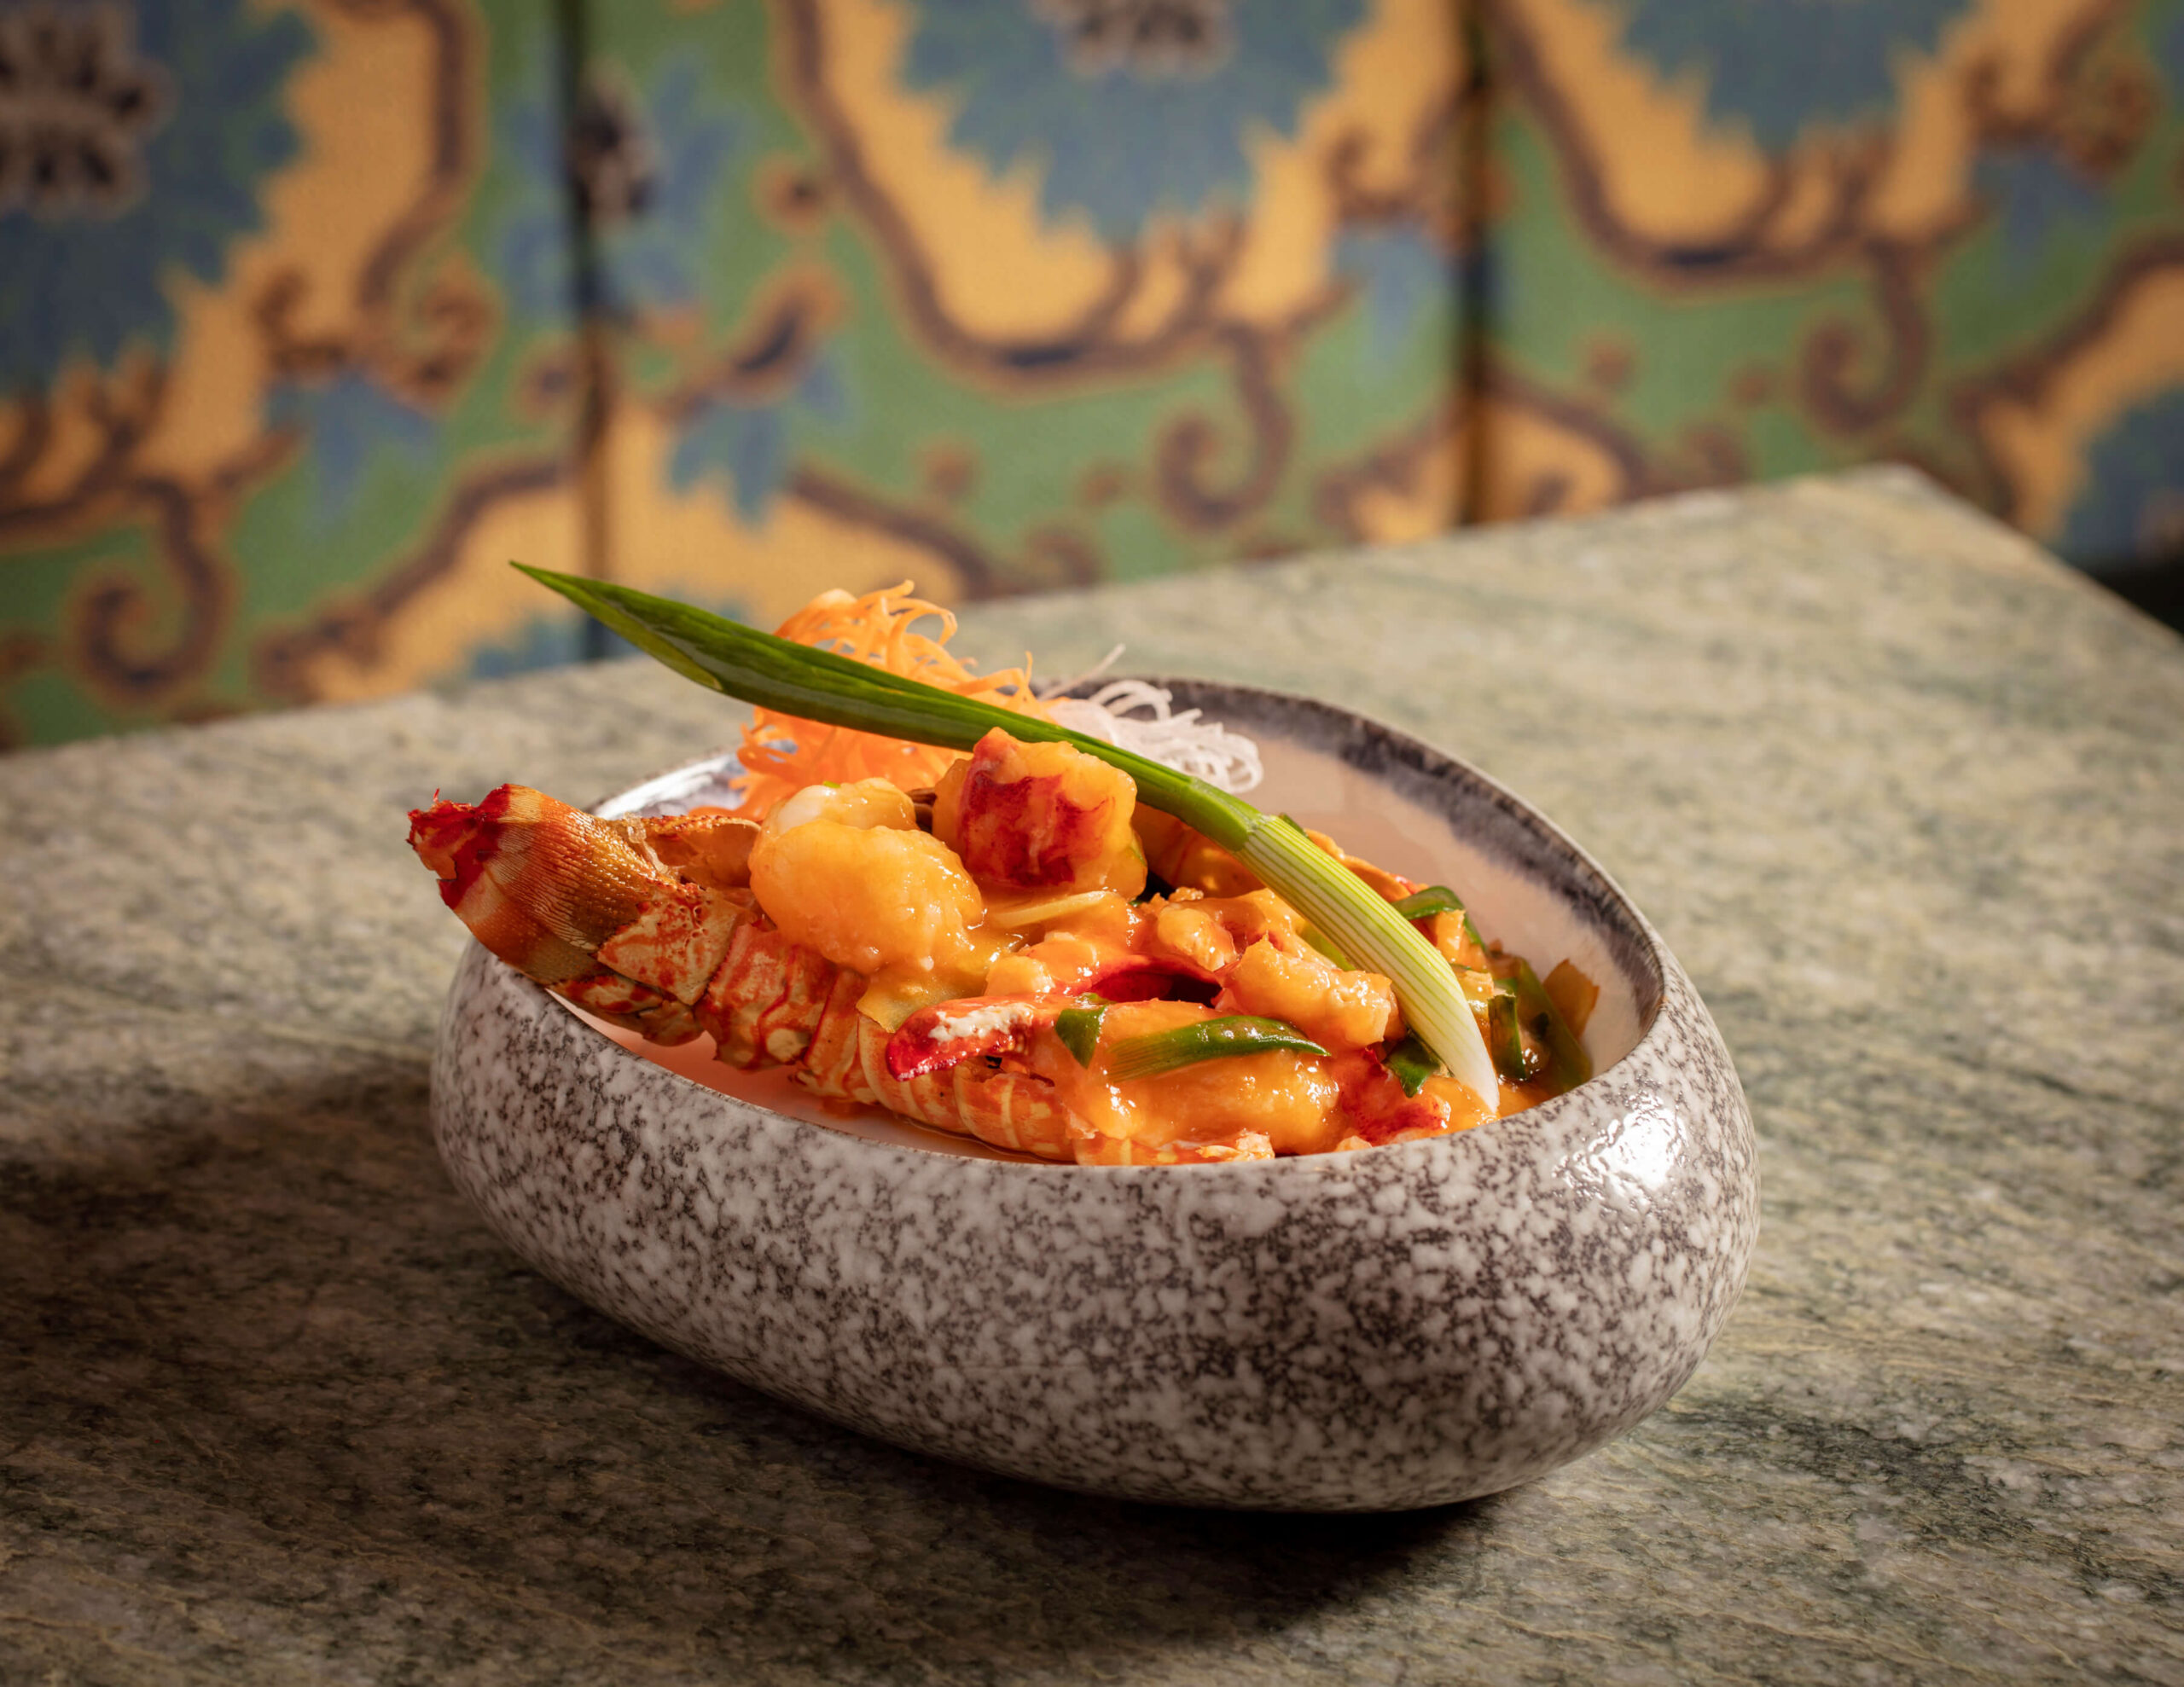 St. James' Court, A Taj Hotel Welcomes The Acclaimed House Of Ming Restaurant To London 